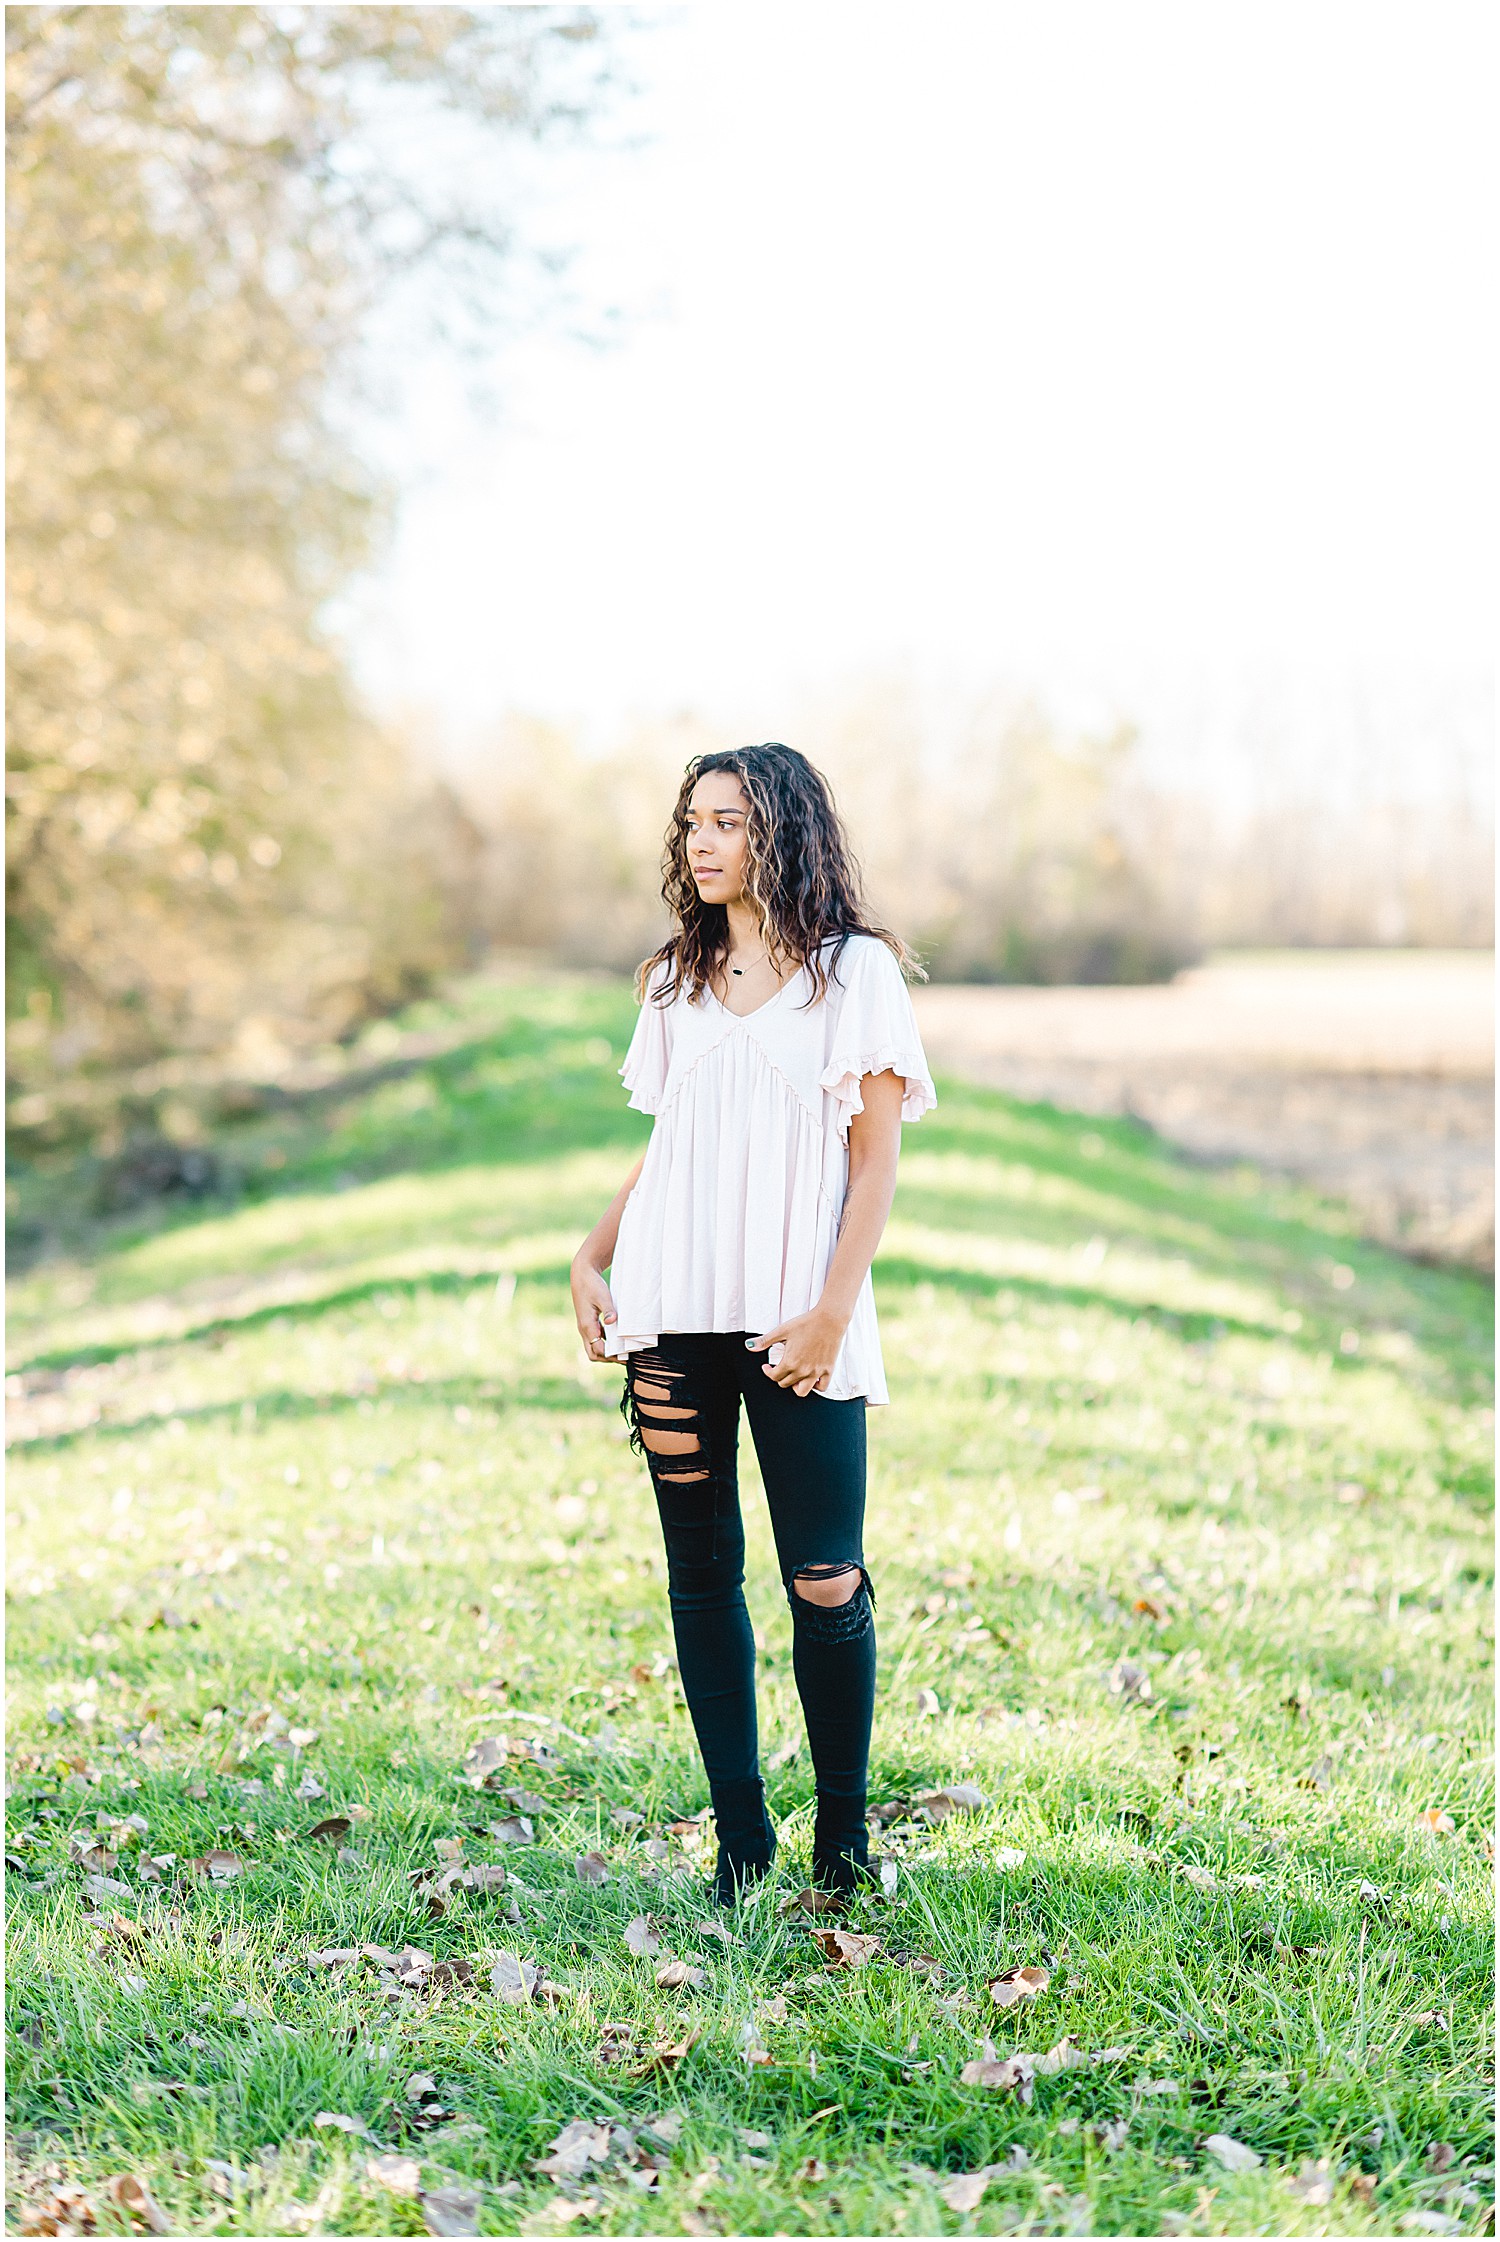 Senior girl wearing ripped black skinny jeans standing on grass staring off to the side during senior pictures